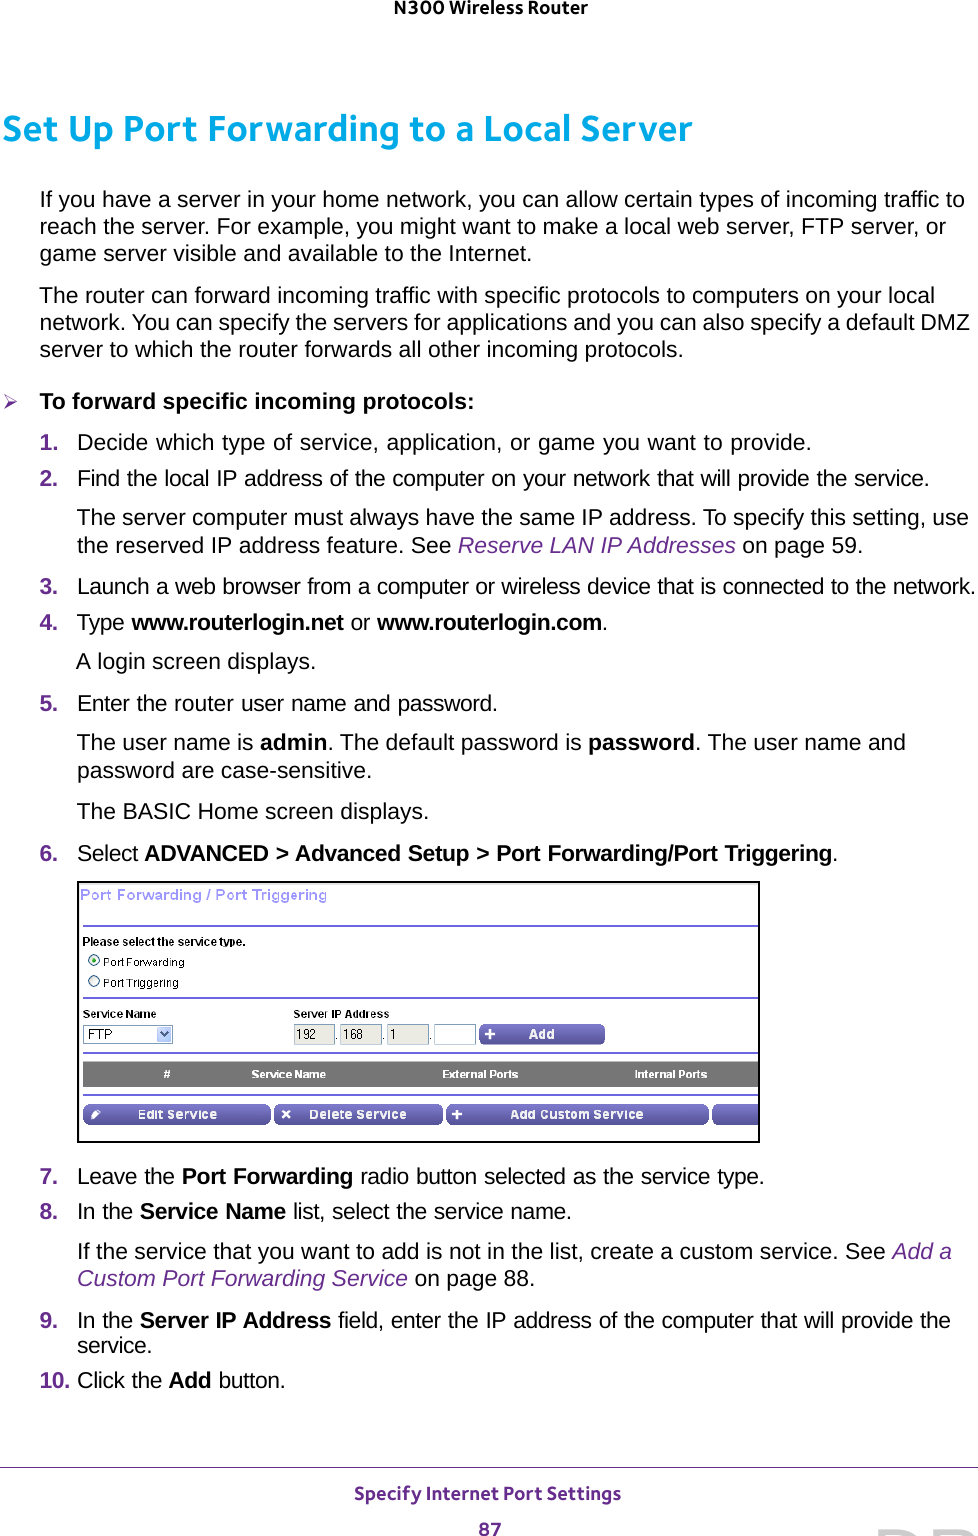 Specify Internet Port Settings 87 N300 Wireless RouterSet Up Port Forwarding to a Local ServerIf you have a server in your home network, you can allow certain types of incoming traffic to reach the server. For example, you might want to make a local web server, FTP server, or game server visible and available to the Internet.The router can forward incoming traffic with specific protocols to computers on your local network. You can specify the servers for applications and you can also specify a default DMZ server to which the router forwards all other incoming protocols.To forward specific incoming protocols:1.  Decide which type of service, application, or game you want to provide.2.  Find the local IP address of the computer on your network that will provide the service.The server computer must always have the same IP address. To specify this setting, use the reserved IP address feature. See Reserve LAN IP Addresses on page  59.3.  Launch a web browser from a computer or wireless device that is connected to the network.4.  Type www.routerlogin.net or www.routerlogin.com.A login screen displays.5.  Enter the router user name and password.The user name is admin. The default password is password. The user name and password are case-sensitive.The BASIC Home screen displays.6.  Select ADVANCED &gt; Advanced Setup &gt; Port Forwarding/Port Triggering.7.  Leave the Port Forwarding radio button selected as the service type.8.  In the Service Name list, select the service name.If the service that you want to add is not in the list, create a custom service. See Add a Custom Port Forwarding Service on page  88.9.  In the Server IP Address field, enter the IP address of the computer that will provide the service. 10. Click the Add button.DRAFT